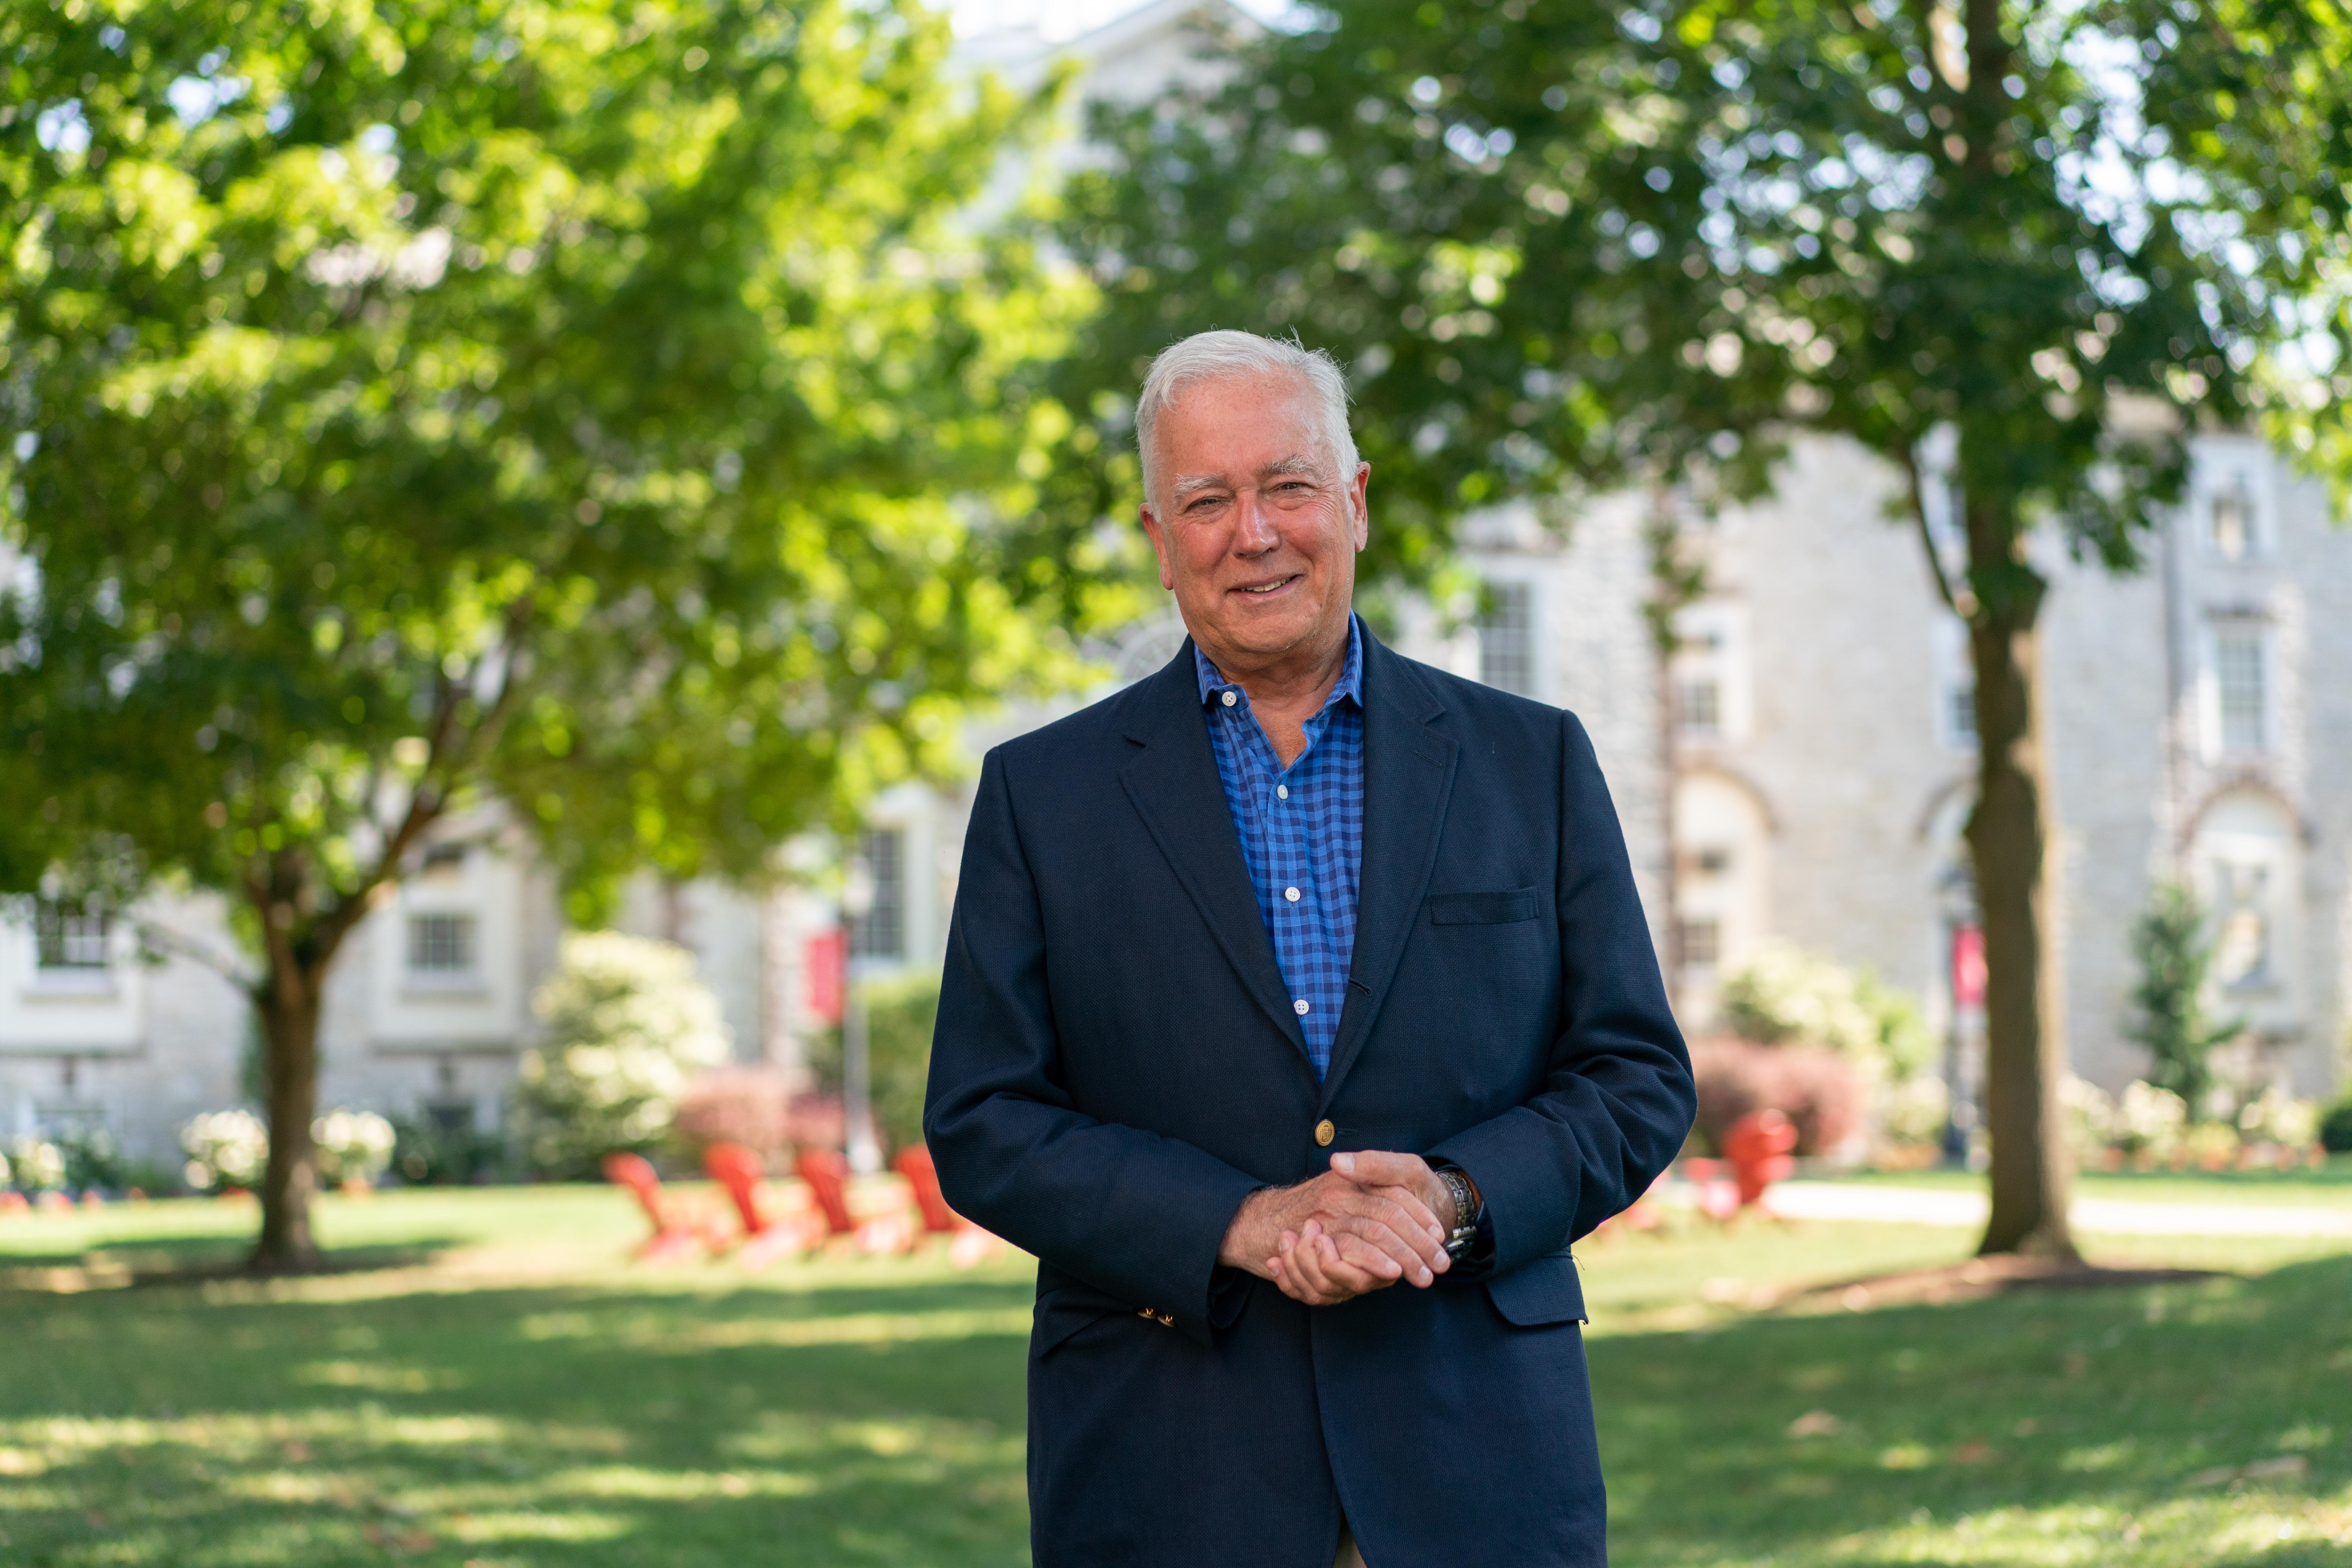 Photo of Dickinson College President John E. Jones III standing in a green lawn in front of a limestone building.